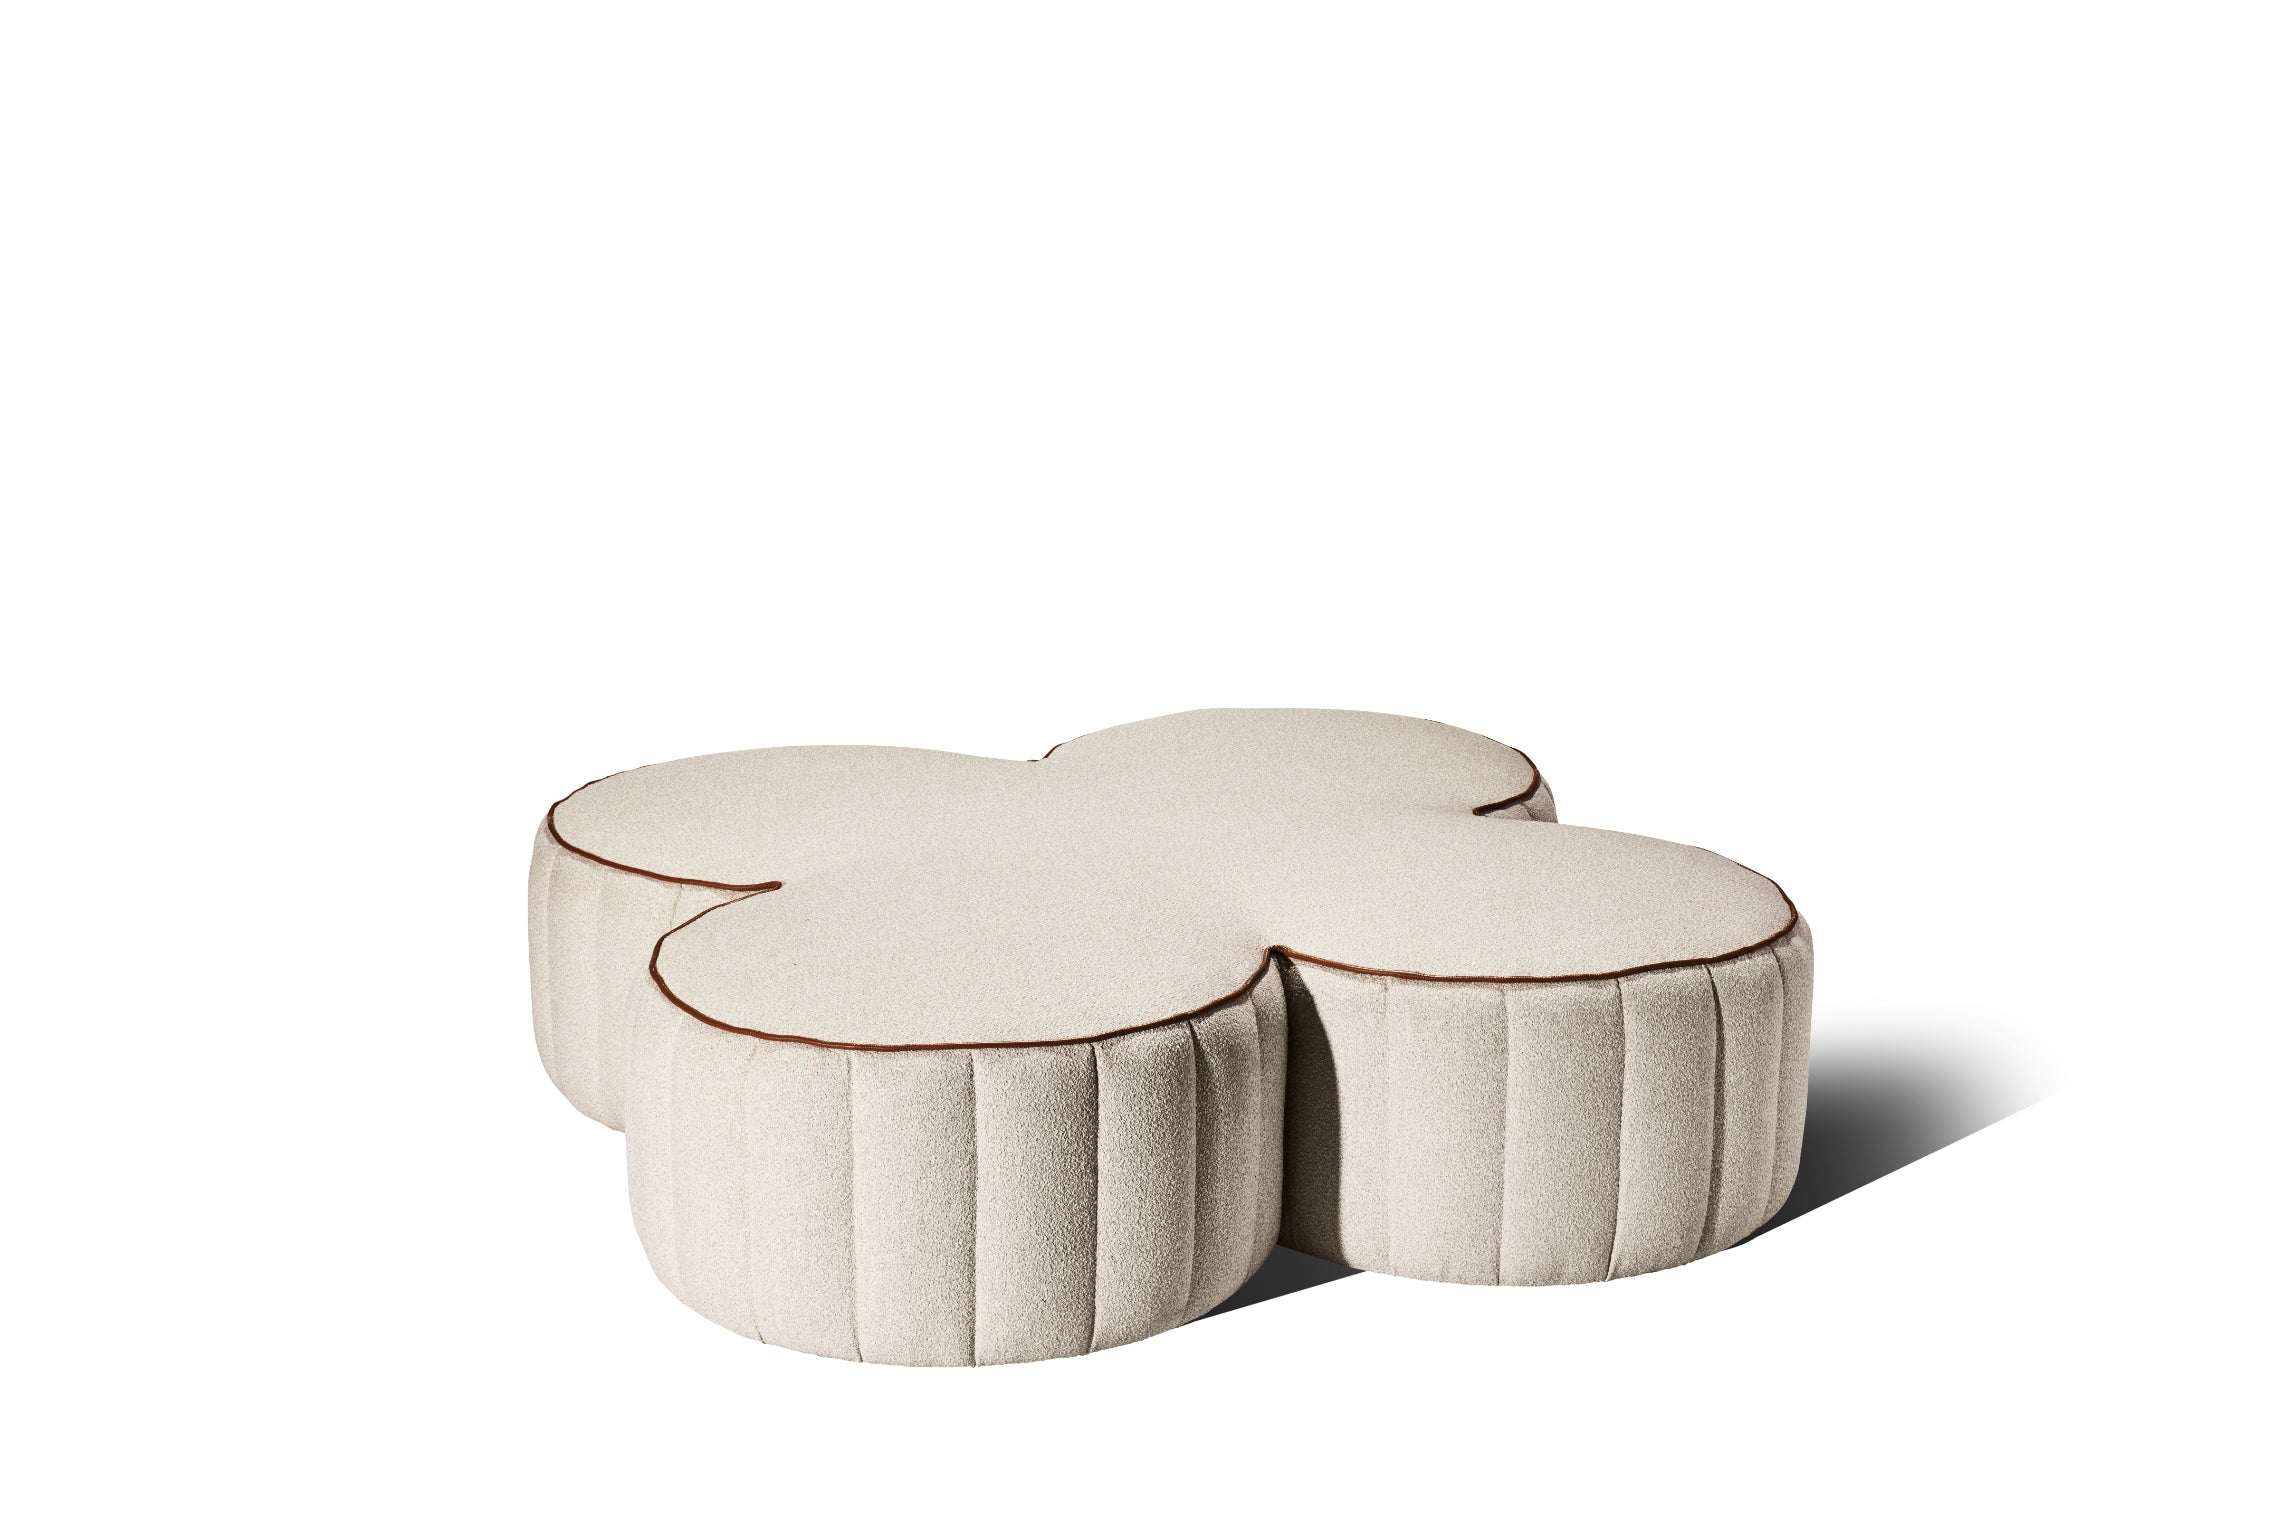 Rosette Ottoman - Moon Dust &amp; Tan Piping - Zuster Furniture